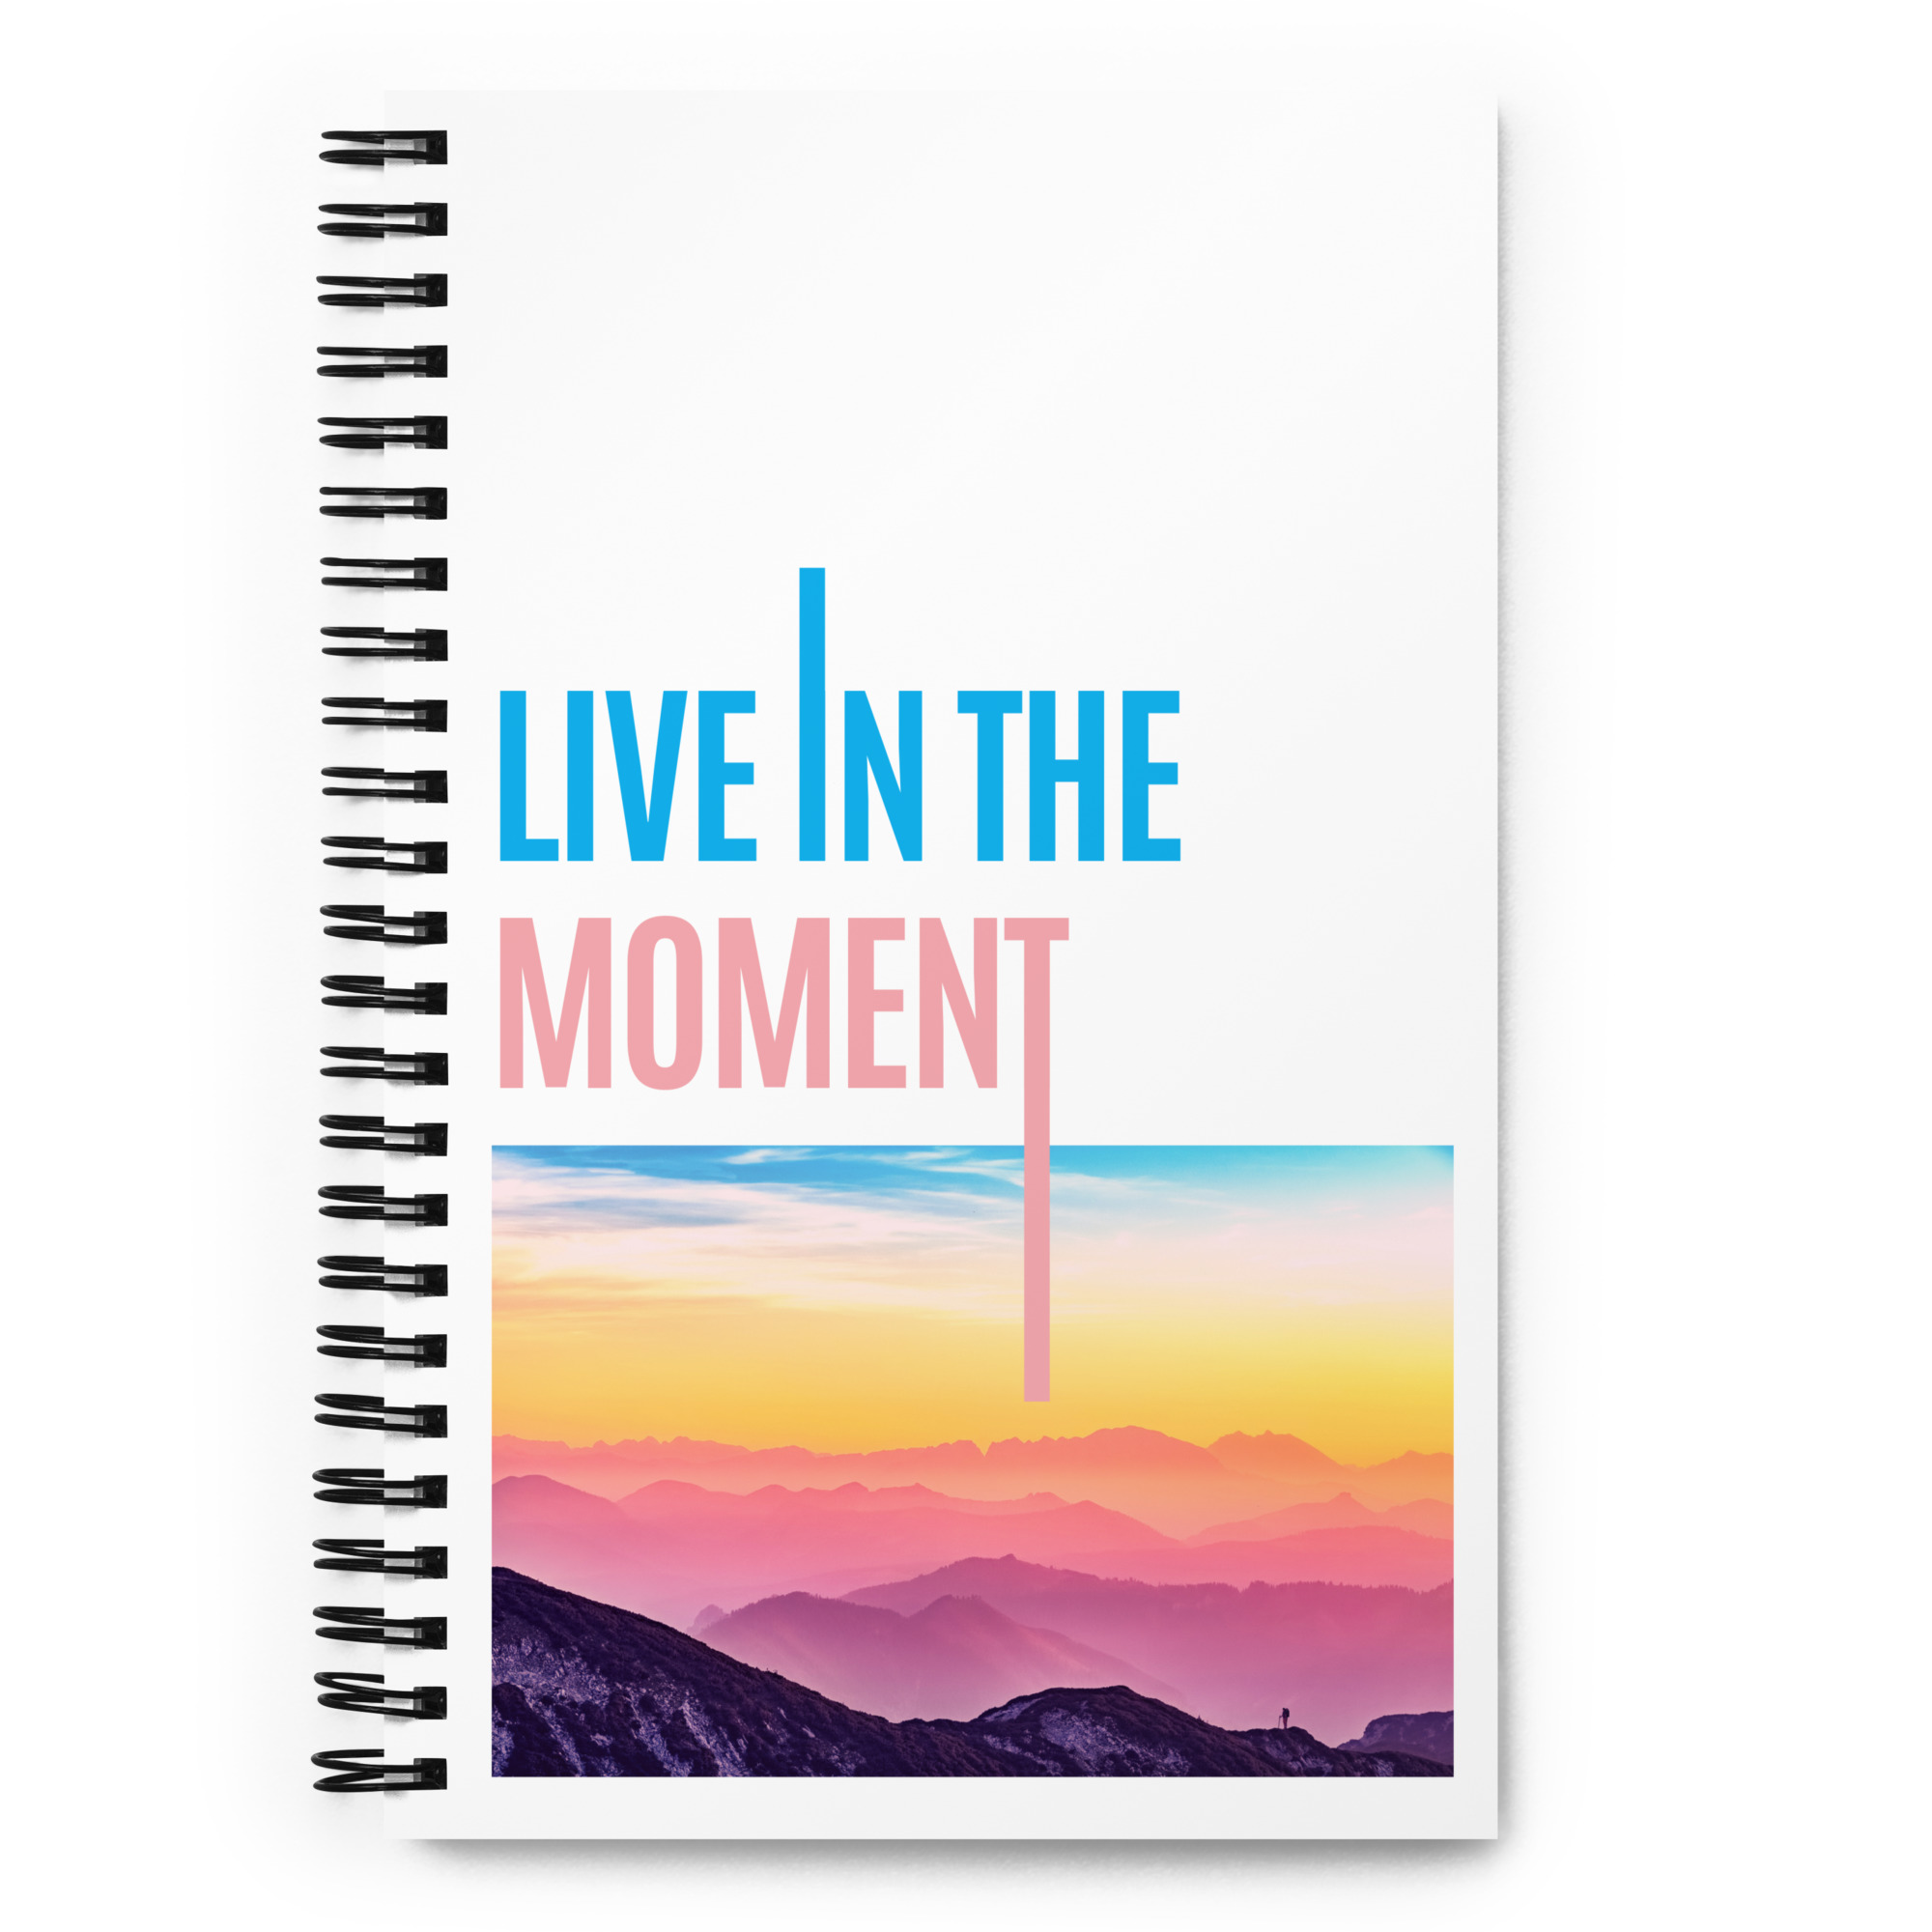 Live in the Moment Poster